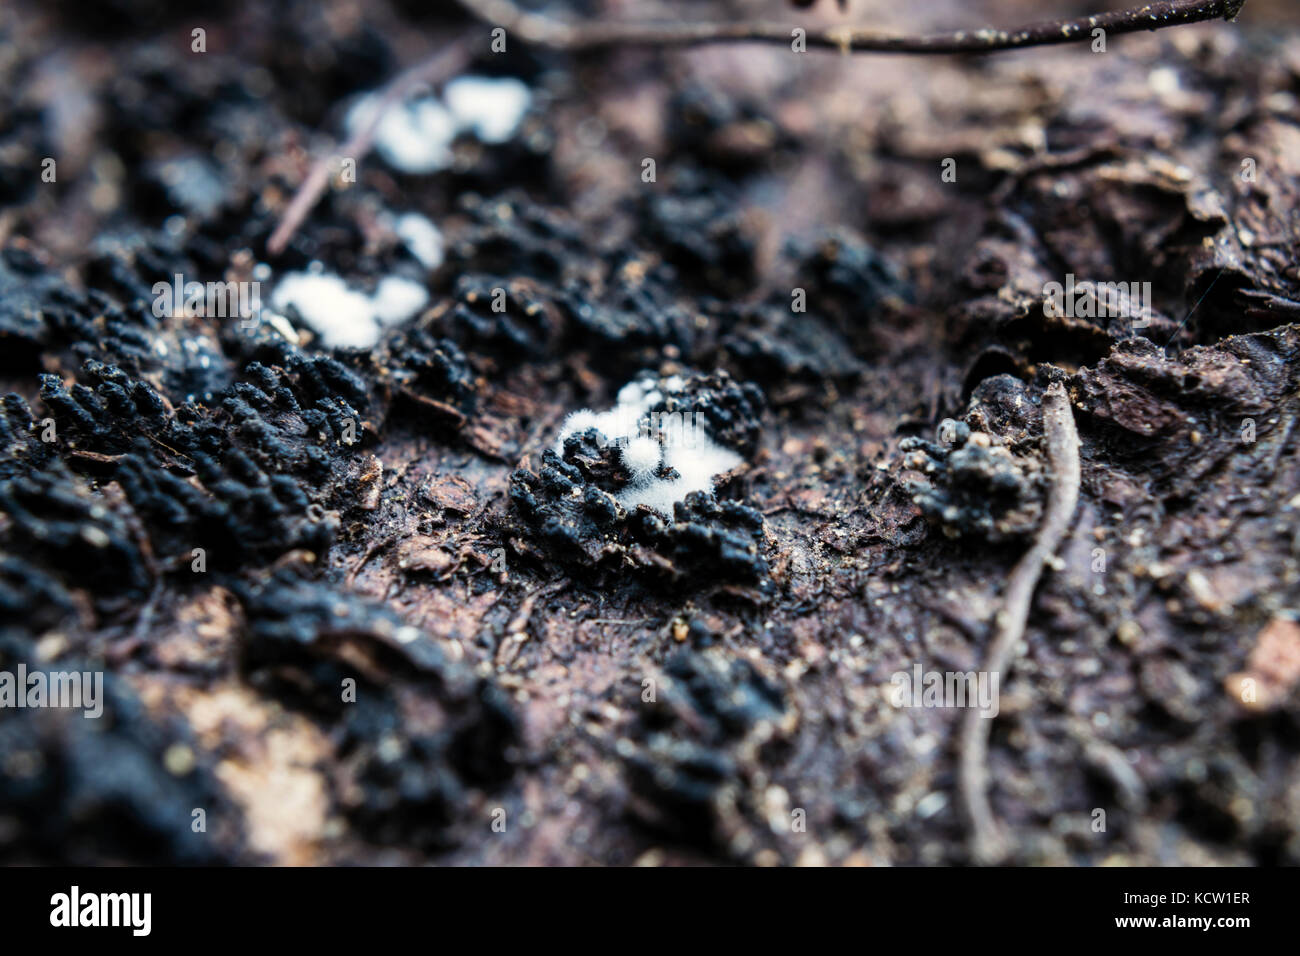 Sporangia of a white slime mould (Myxomycetes) growing on a